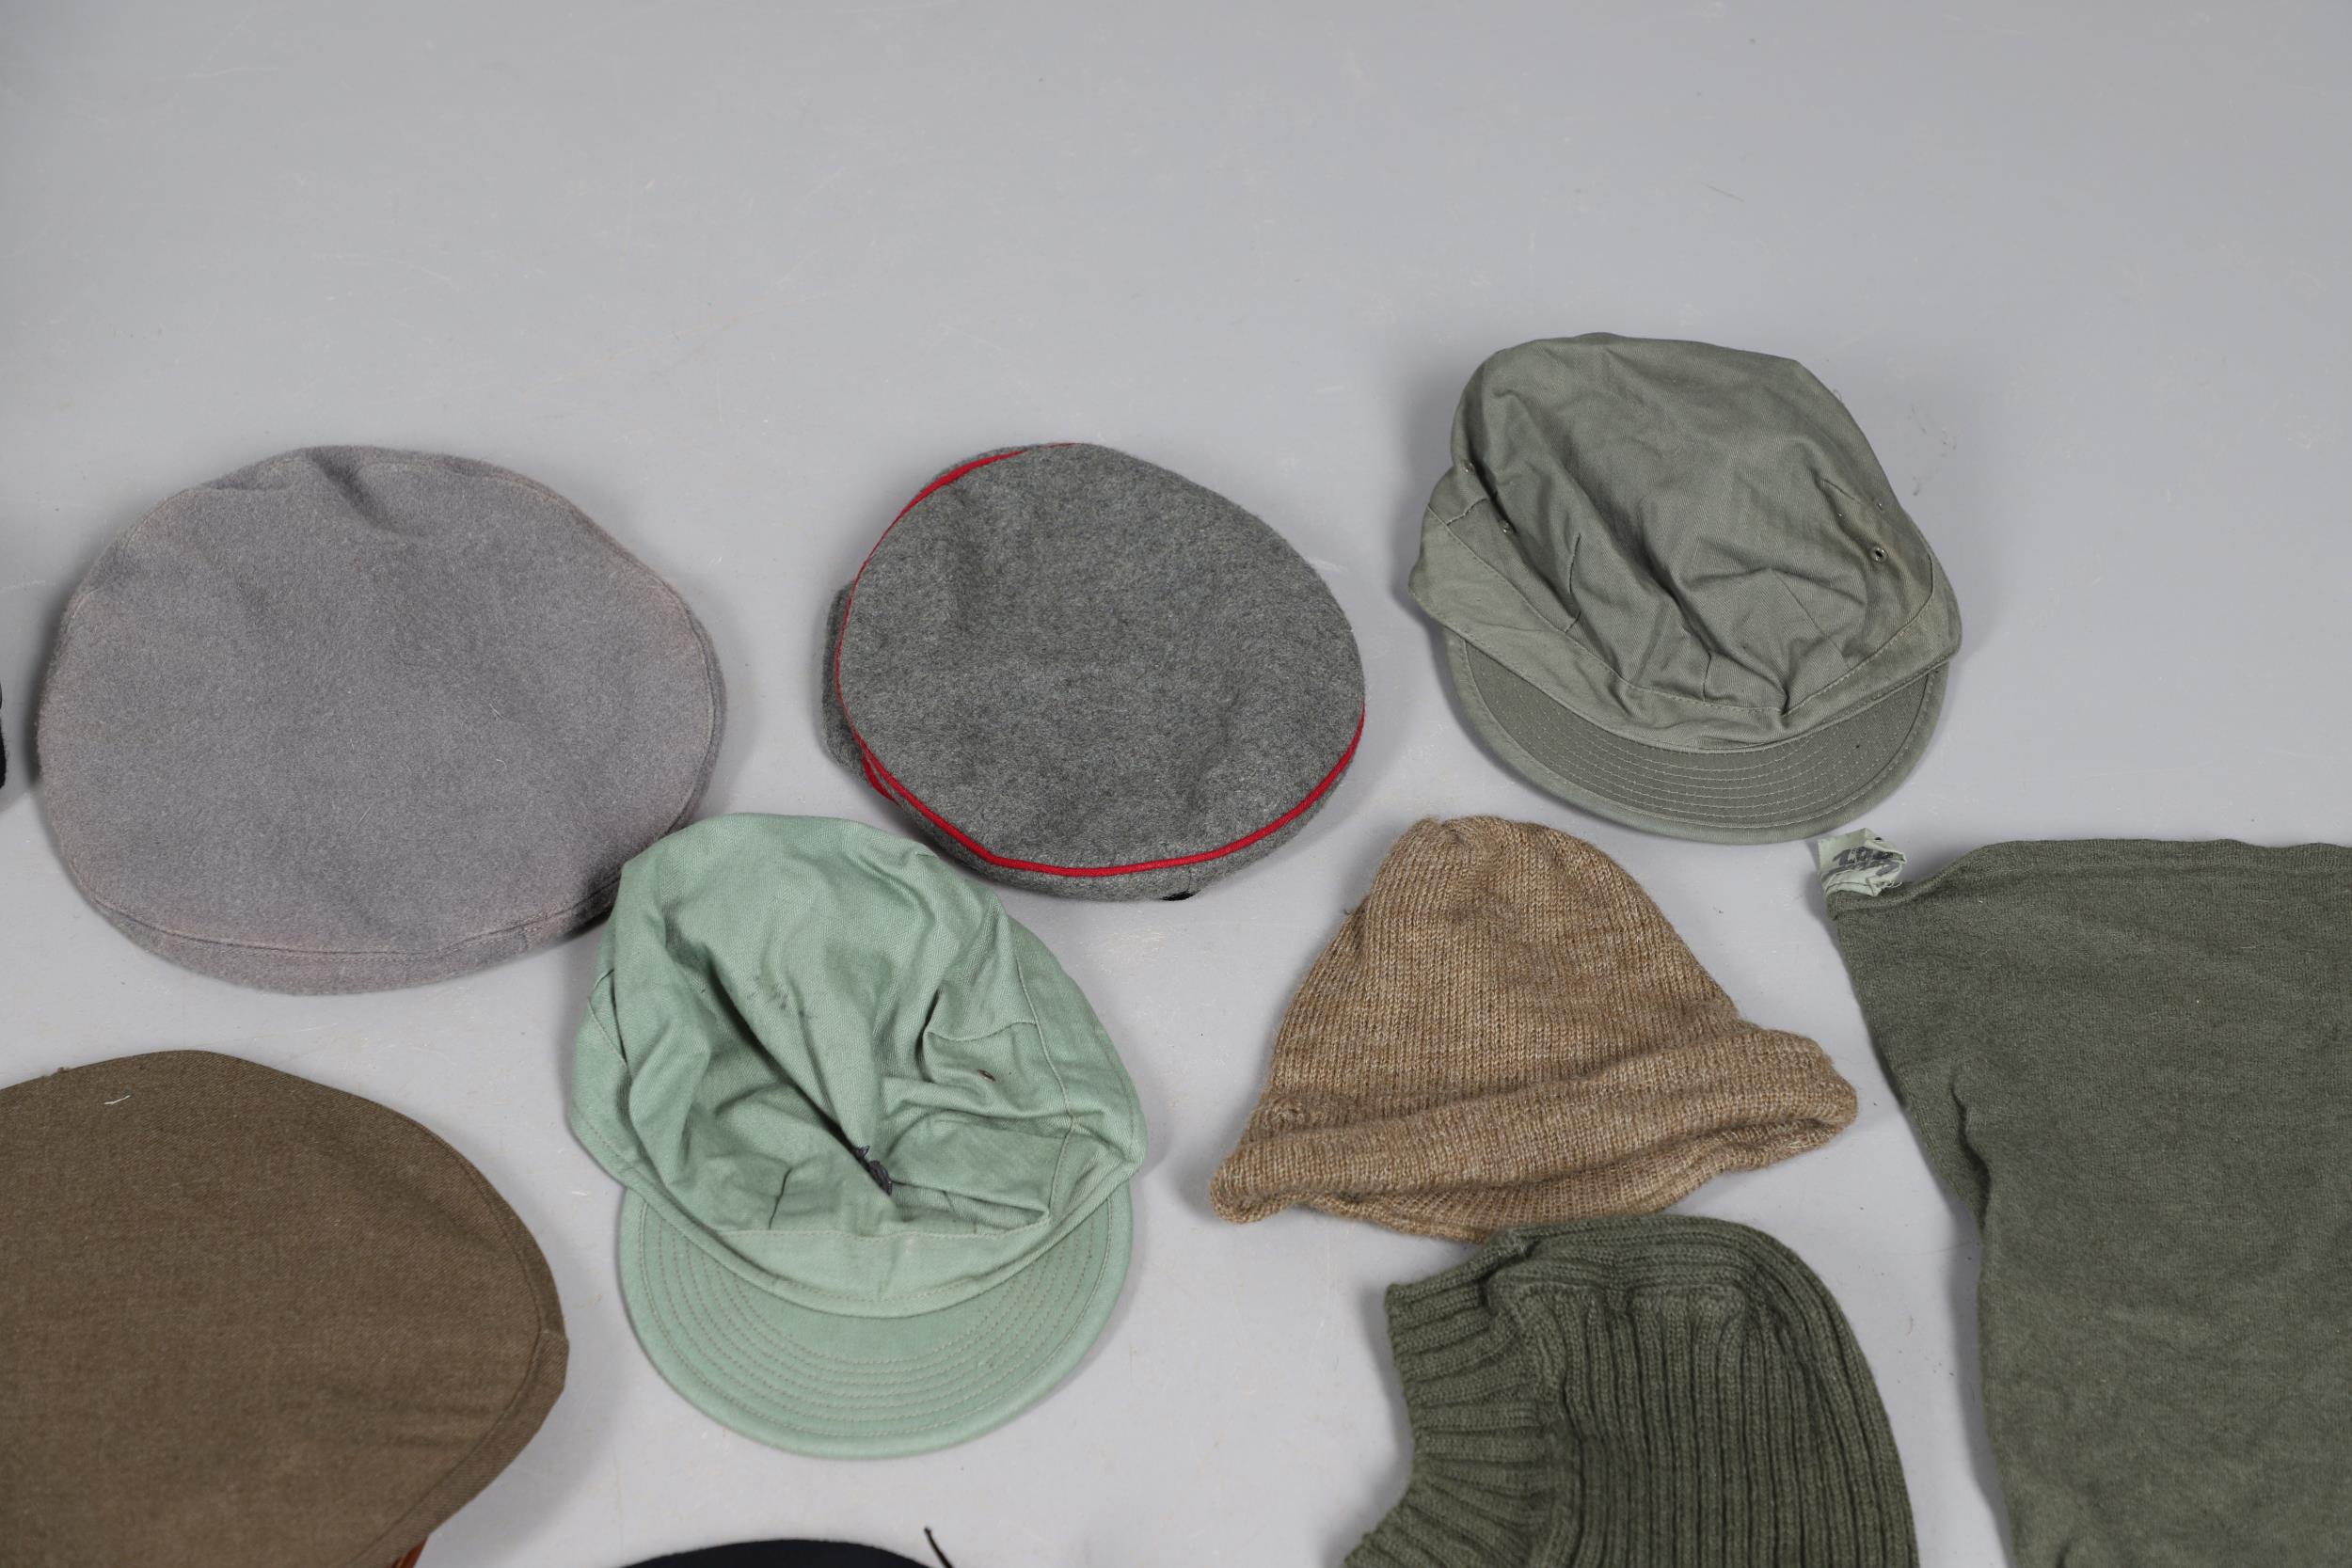 AN EXTENSIVE COLLECTION OF MILITARY UNIFORM CAPS, BERETS AND OTHER ITEMS. SECOND WORLD WAR AND LATER - Image 9 of 17